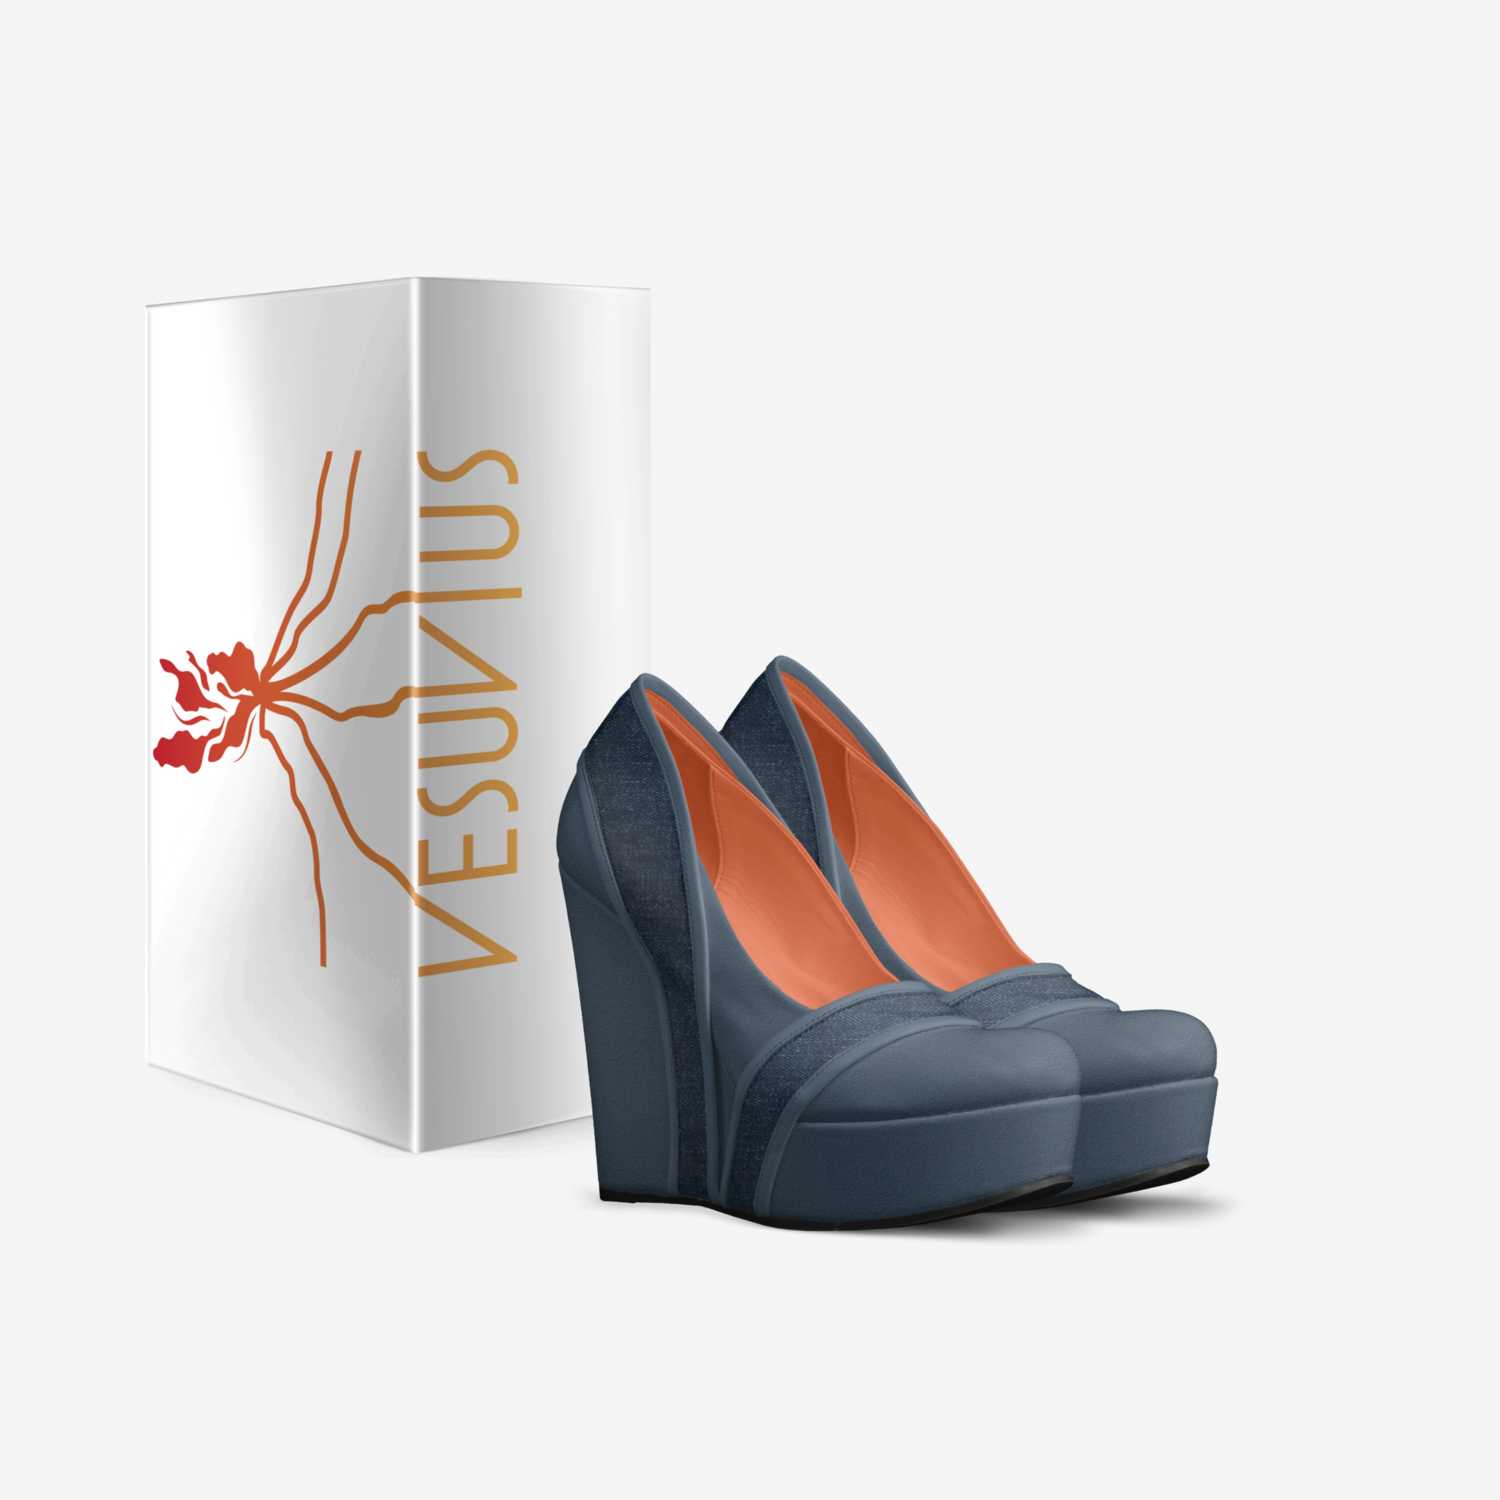 Eloisa by Vesuvius custom made in Italy shoes by Tiffany Kaplan | Box view